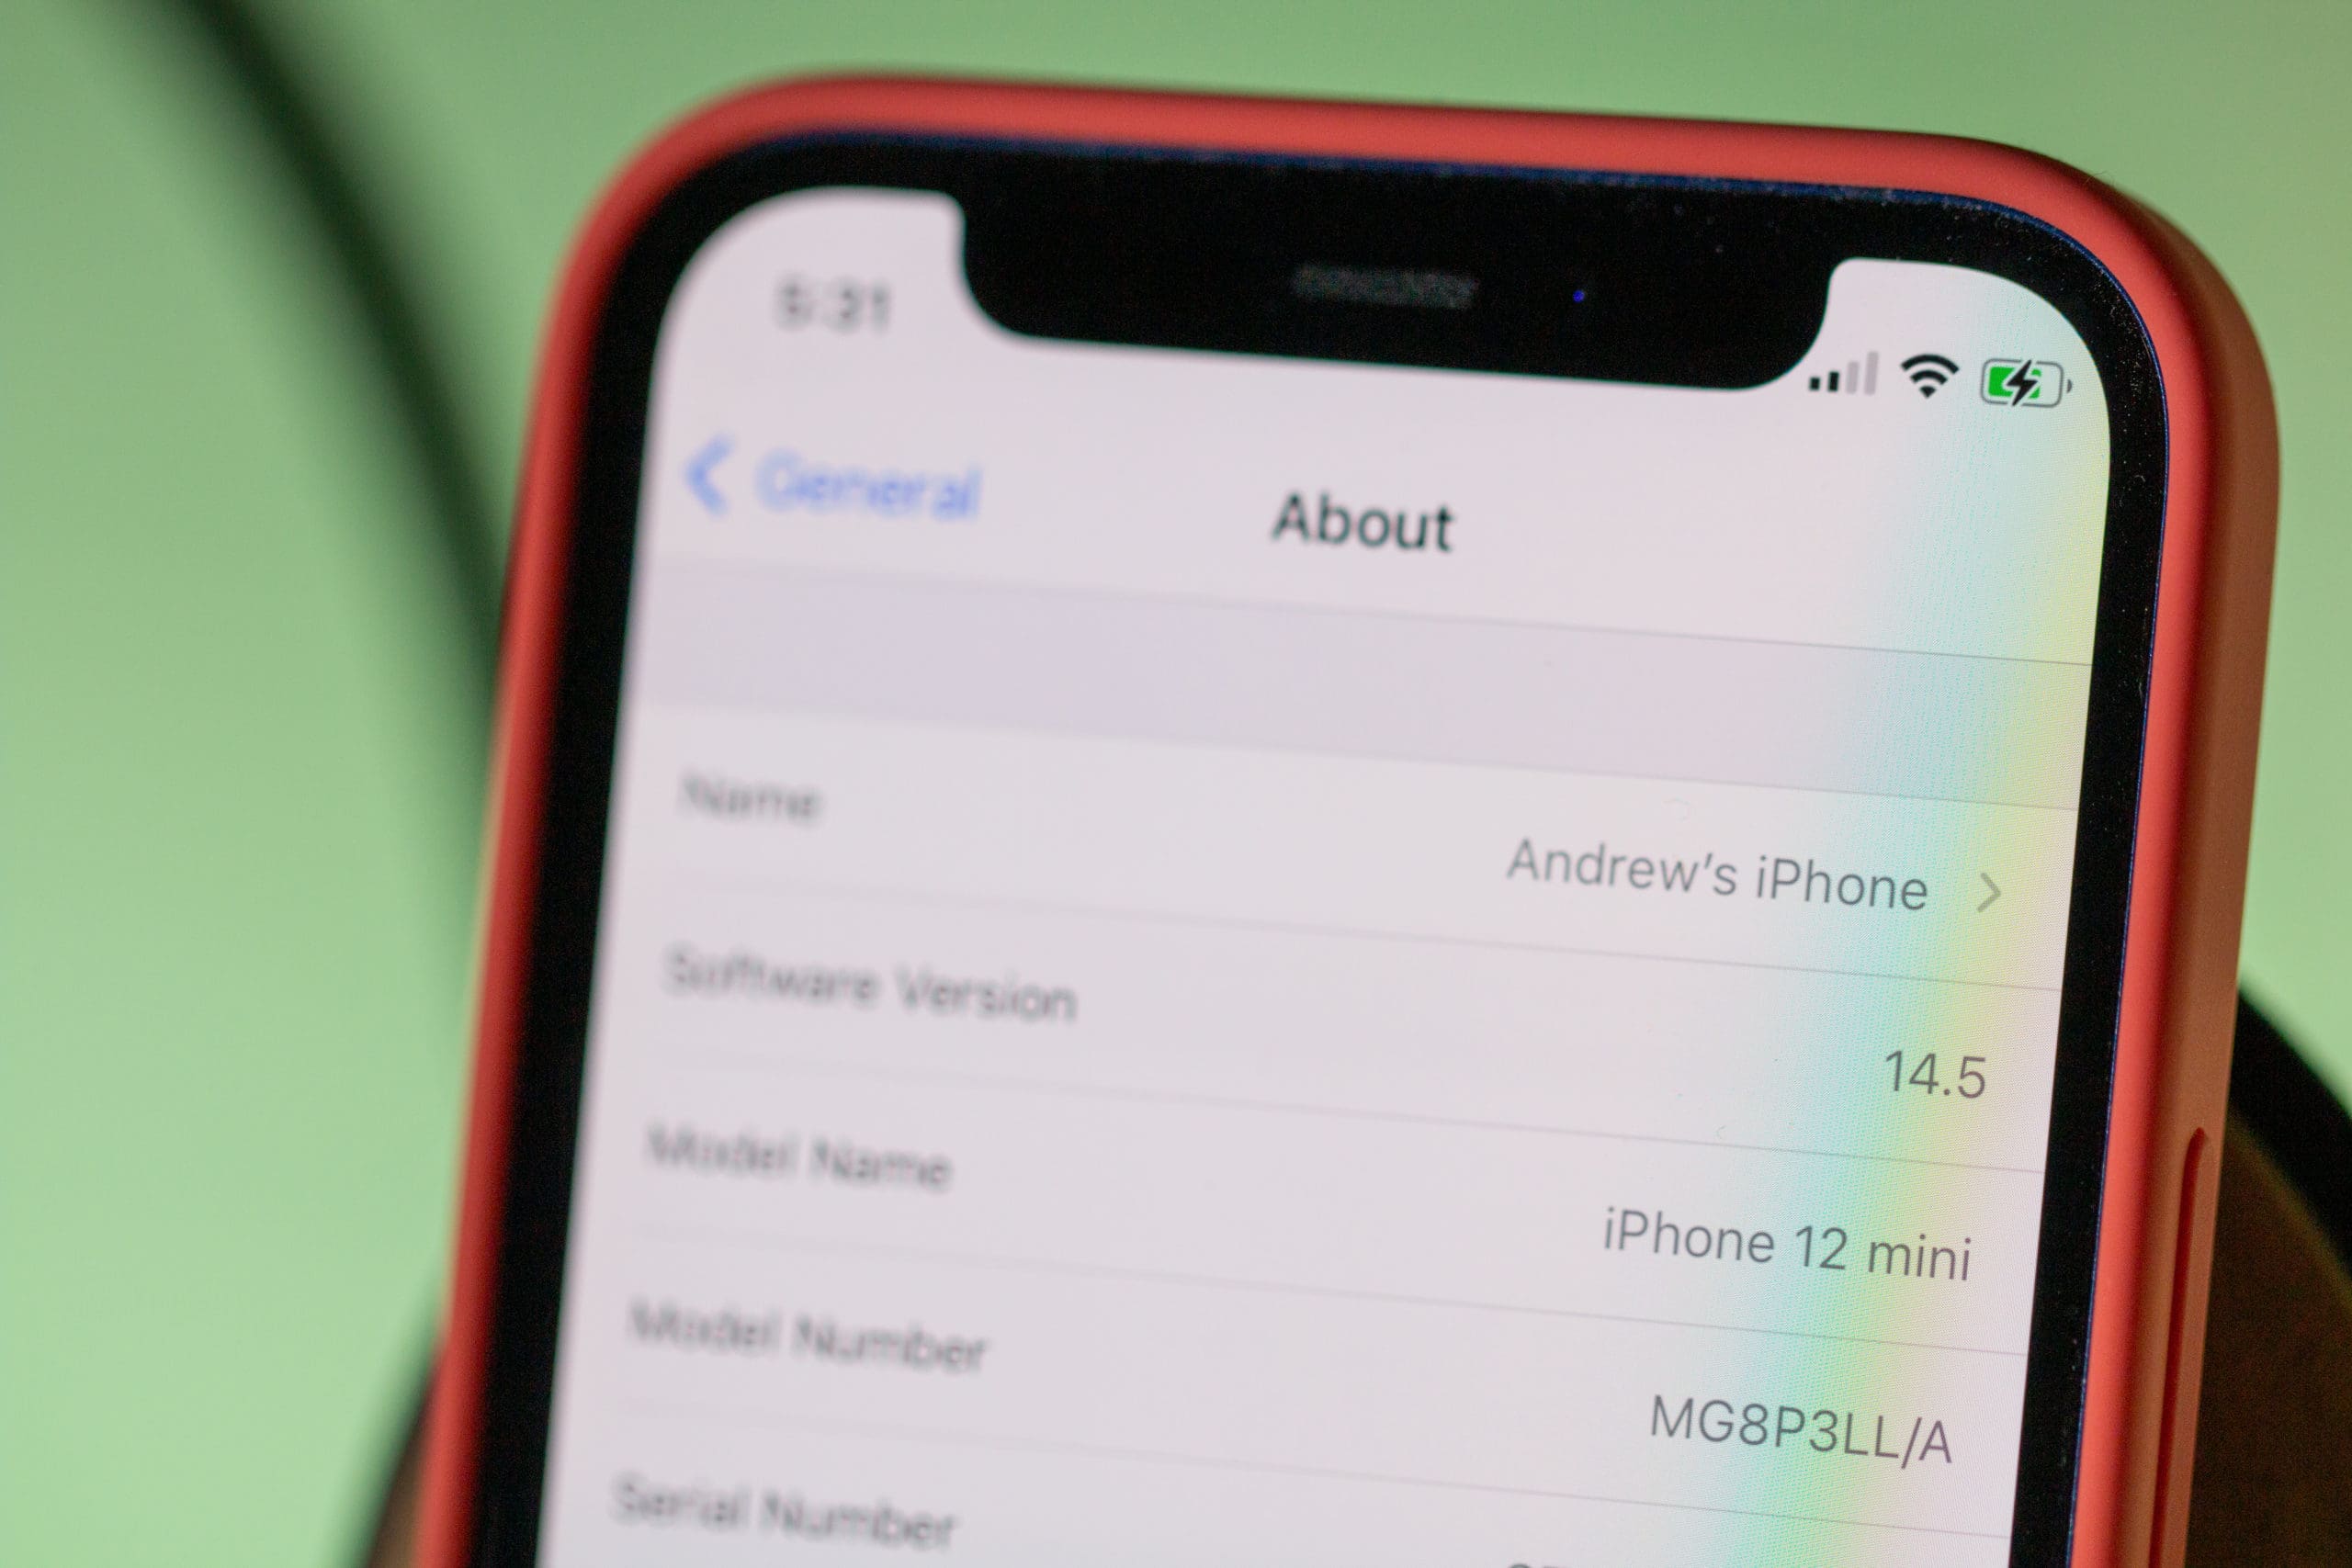 What's new in iOS 14.5 Hero